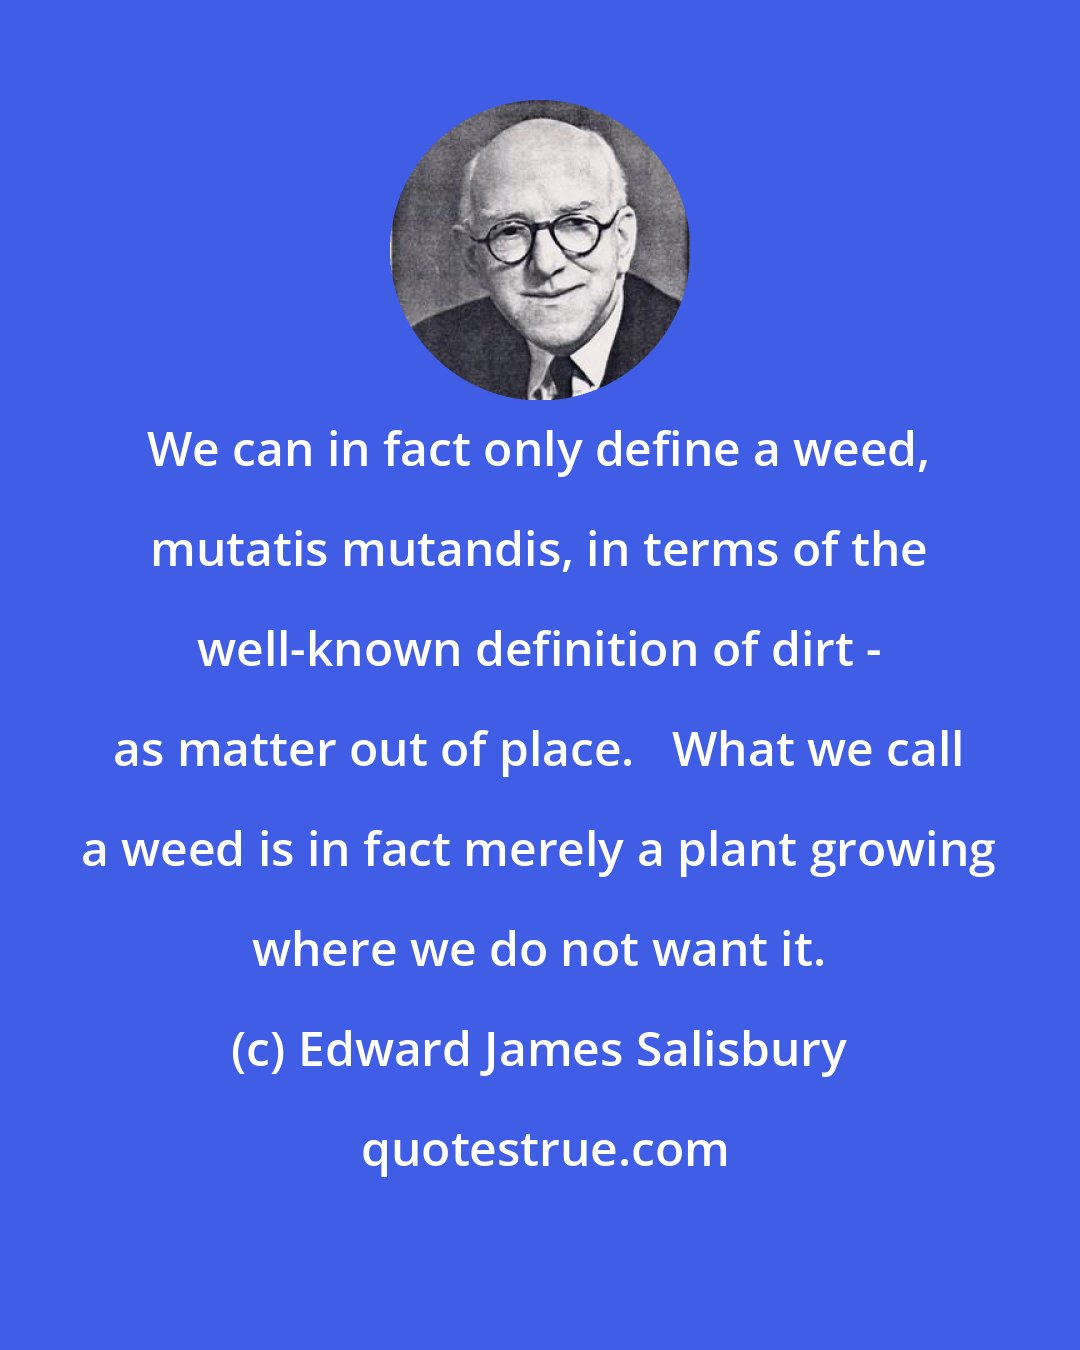 Edward James Salisbury: We can in fact only define a weed, mutatis mutandis, in terms of the well-known definition of dirt - as matter out of place.   What we call a weed is in fact merely a plant growing where we do not want it.